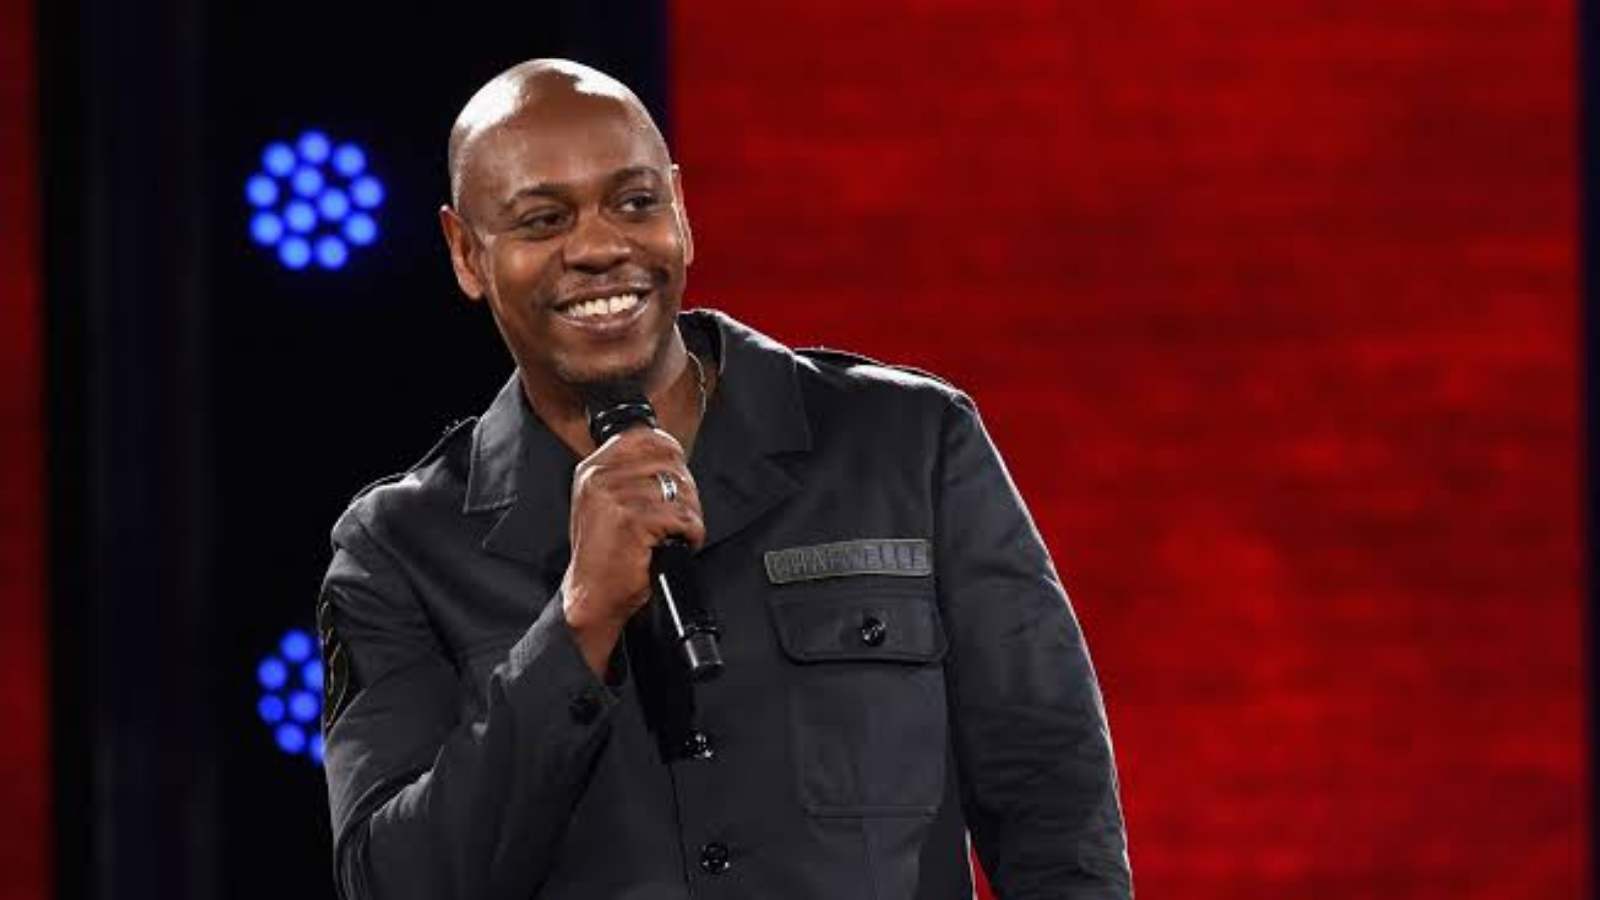 Dave Chappelle has a new show coming up!